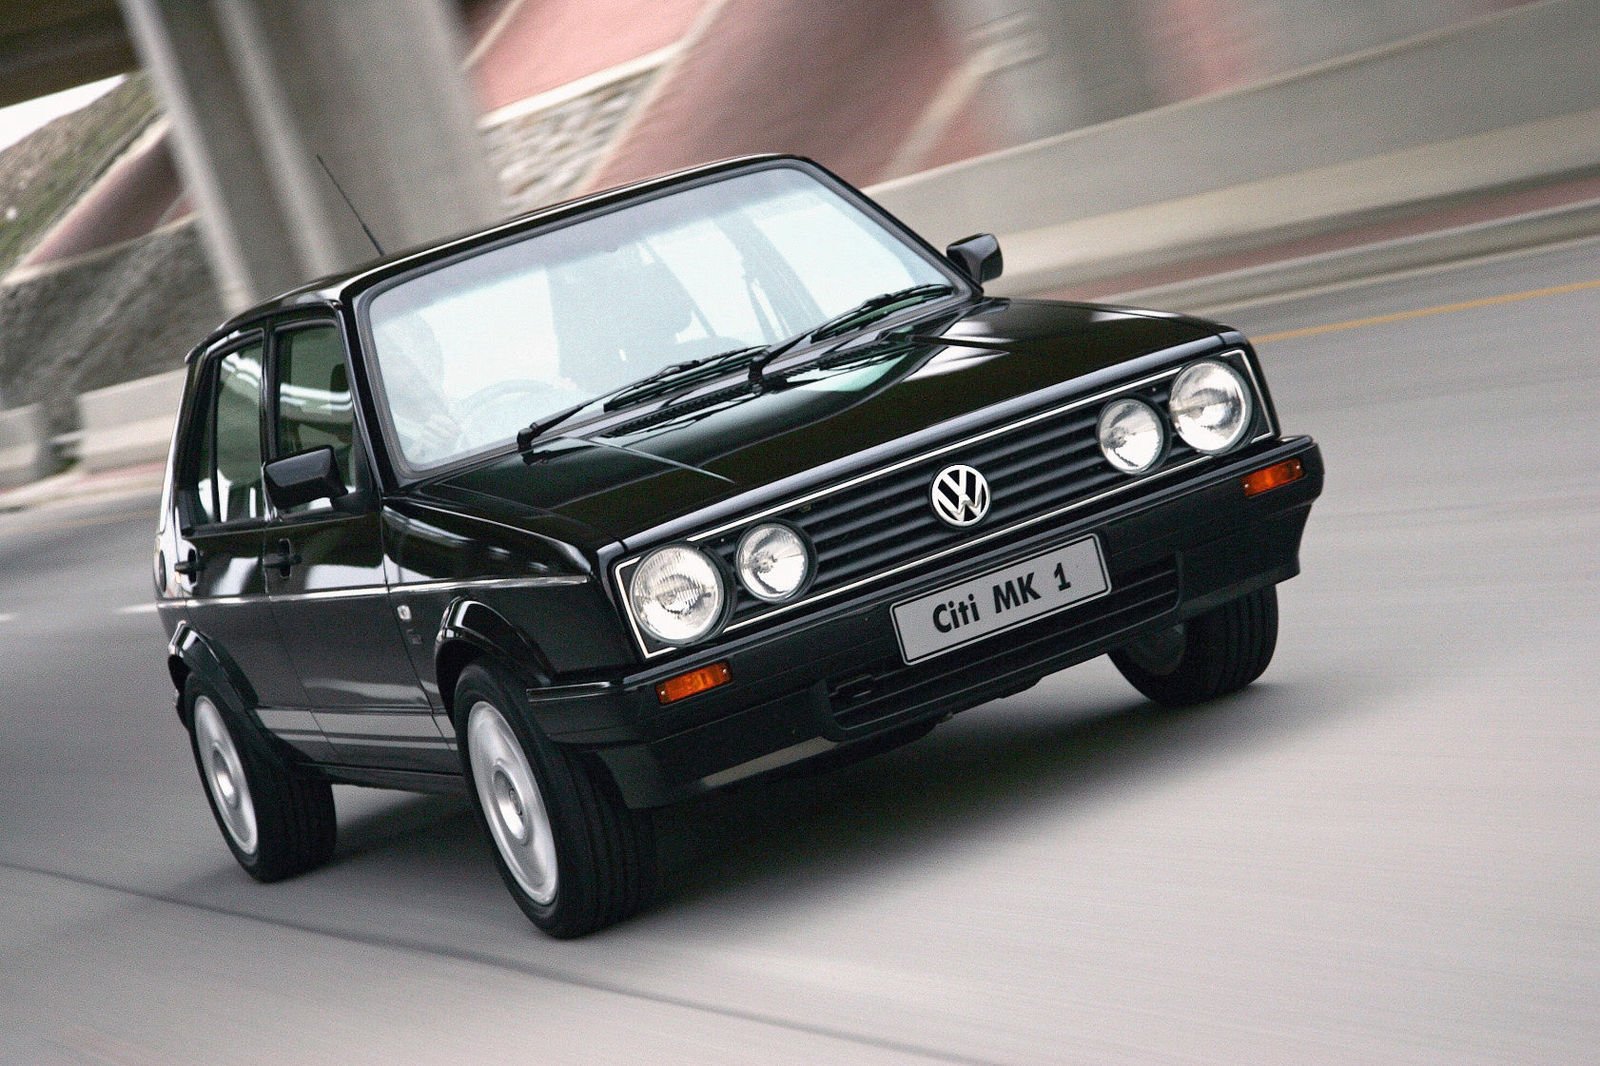 Volkwagen Citi Mk1 Limited Edition (South Africa)